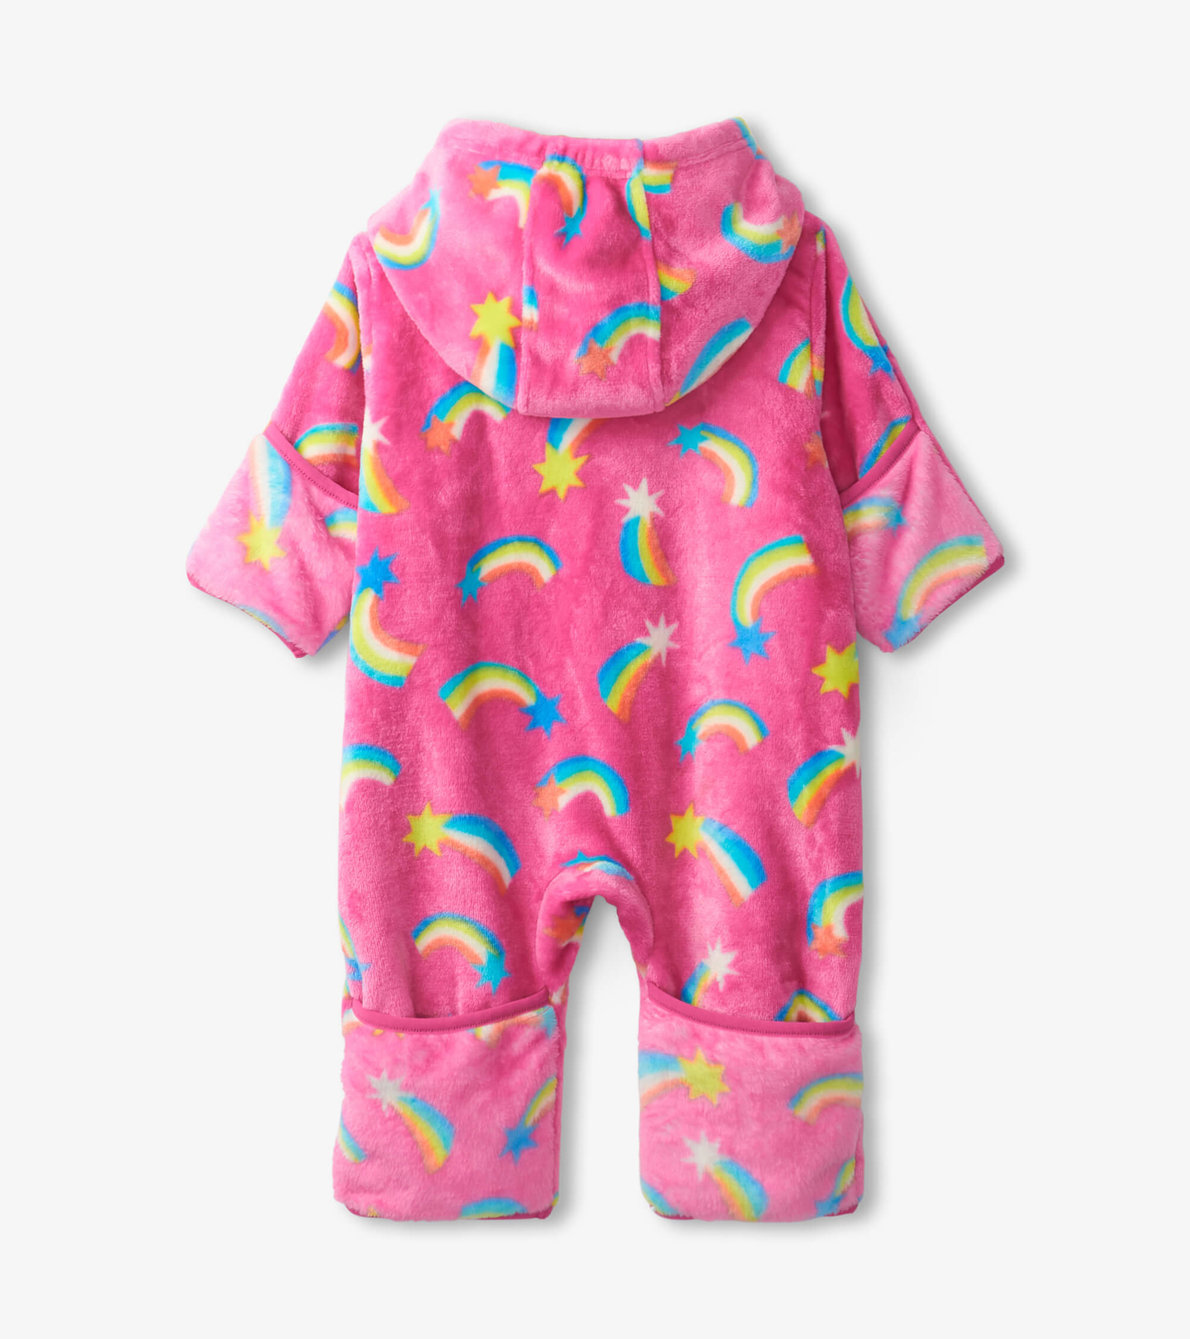 View larger image of Shooting Stars Baby Fleece Suit